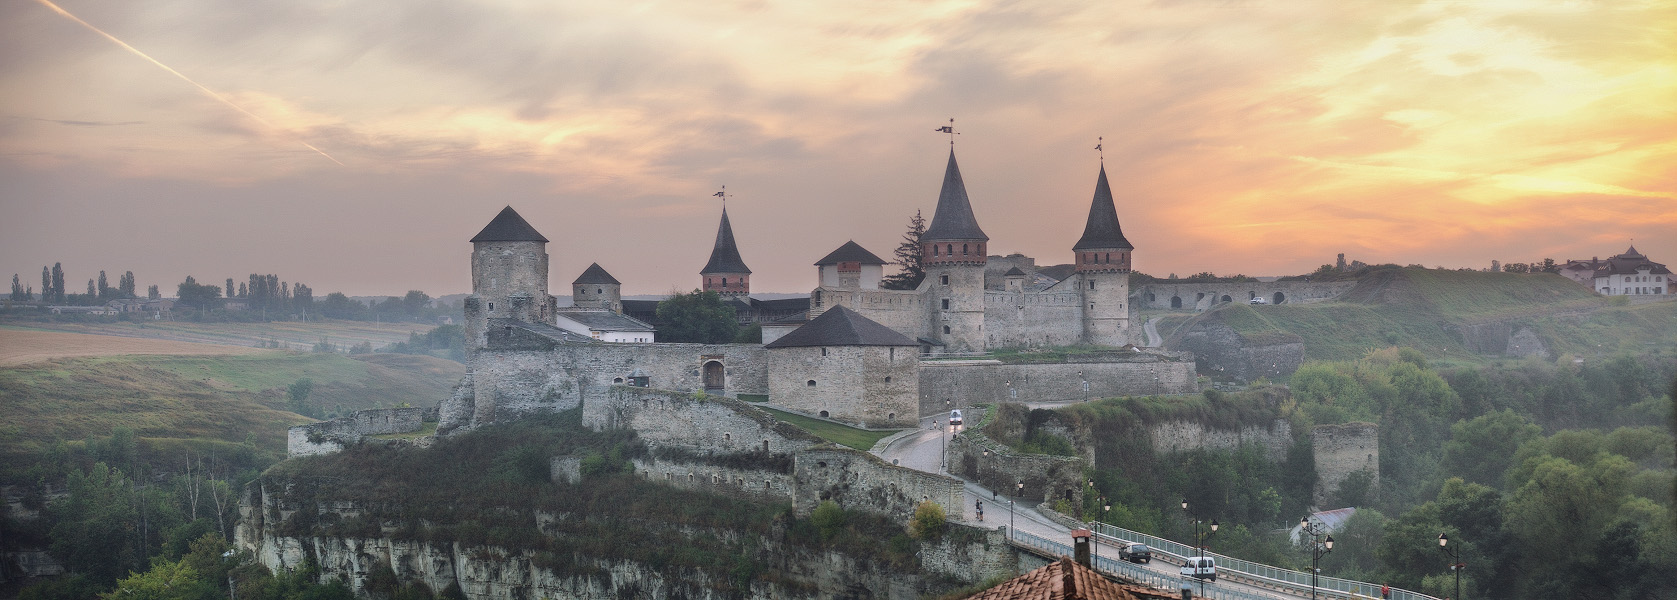 Kamianets-Podilskyi Castle Backgrounds, Compatible - PC, Mobile, Gadgets| 1677x600 px